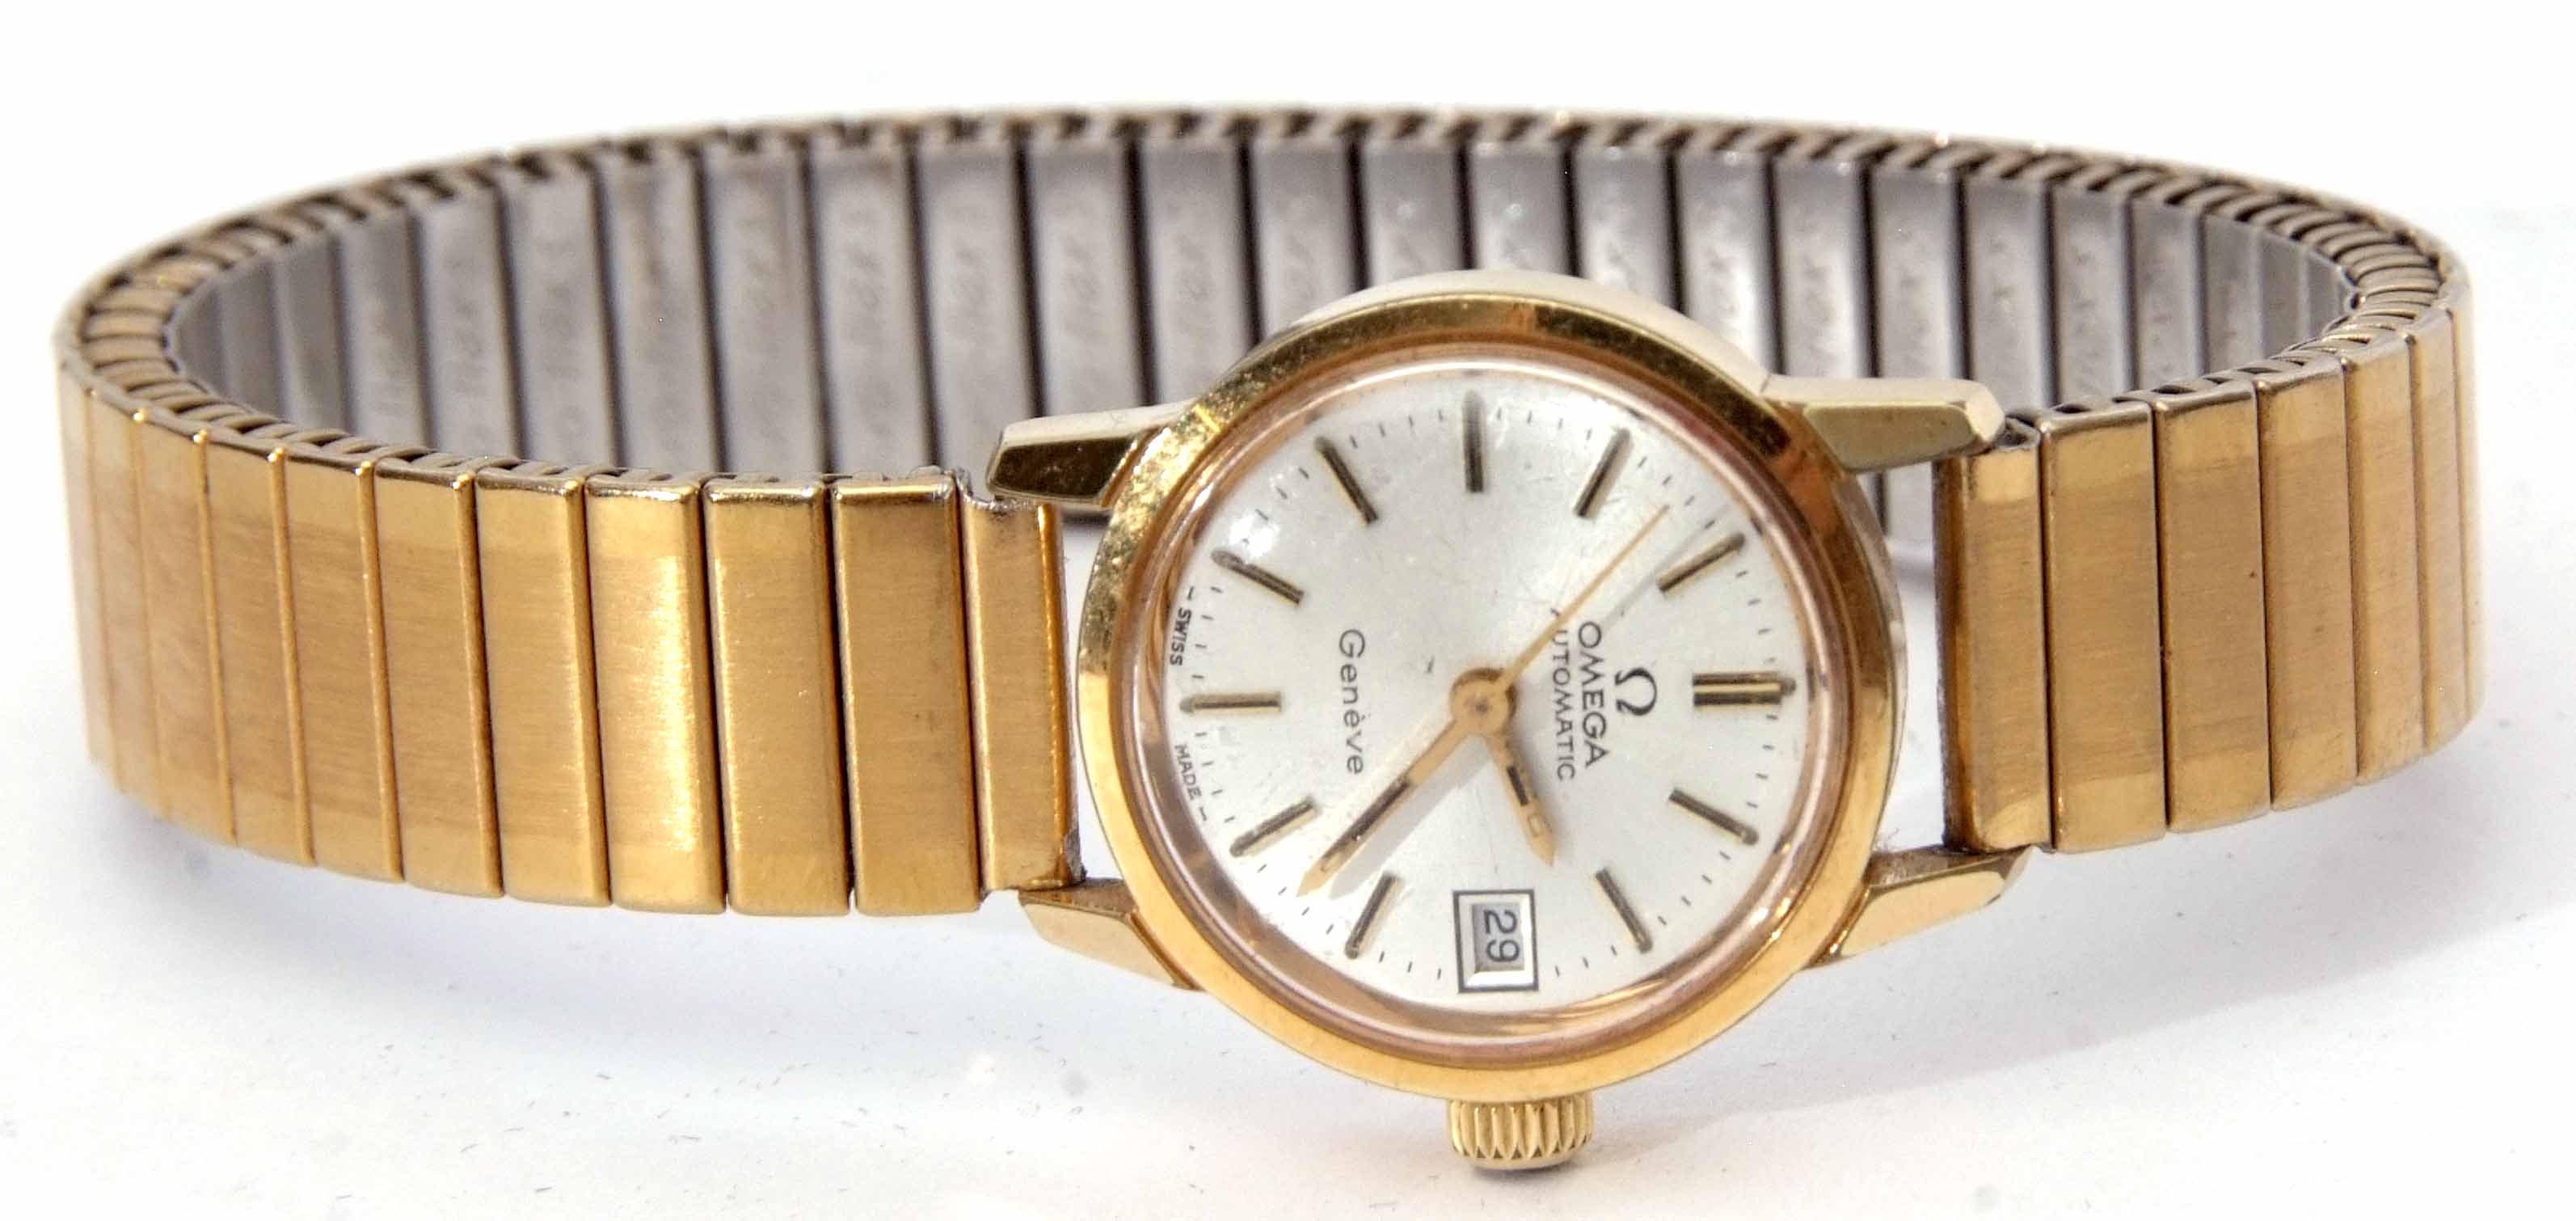 Late 20th century gold plated automatic centre seconds calendar wrist watch, Omega "Geneve", cal